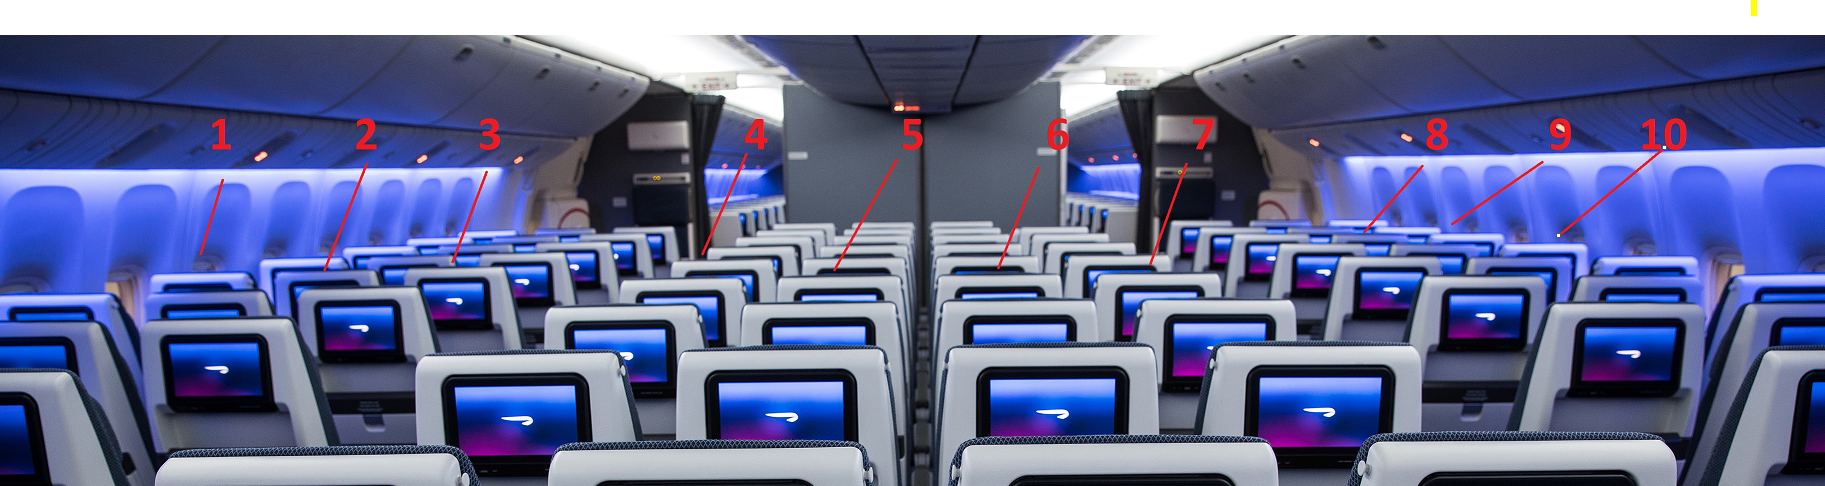 Analysis The New Three Class British Airways Gatwick 777s How Tight Are They Packing Them In Economy Class Beyond